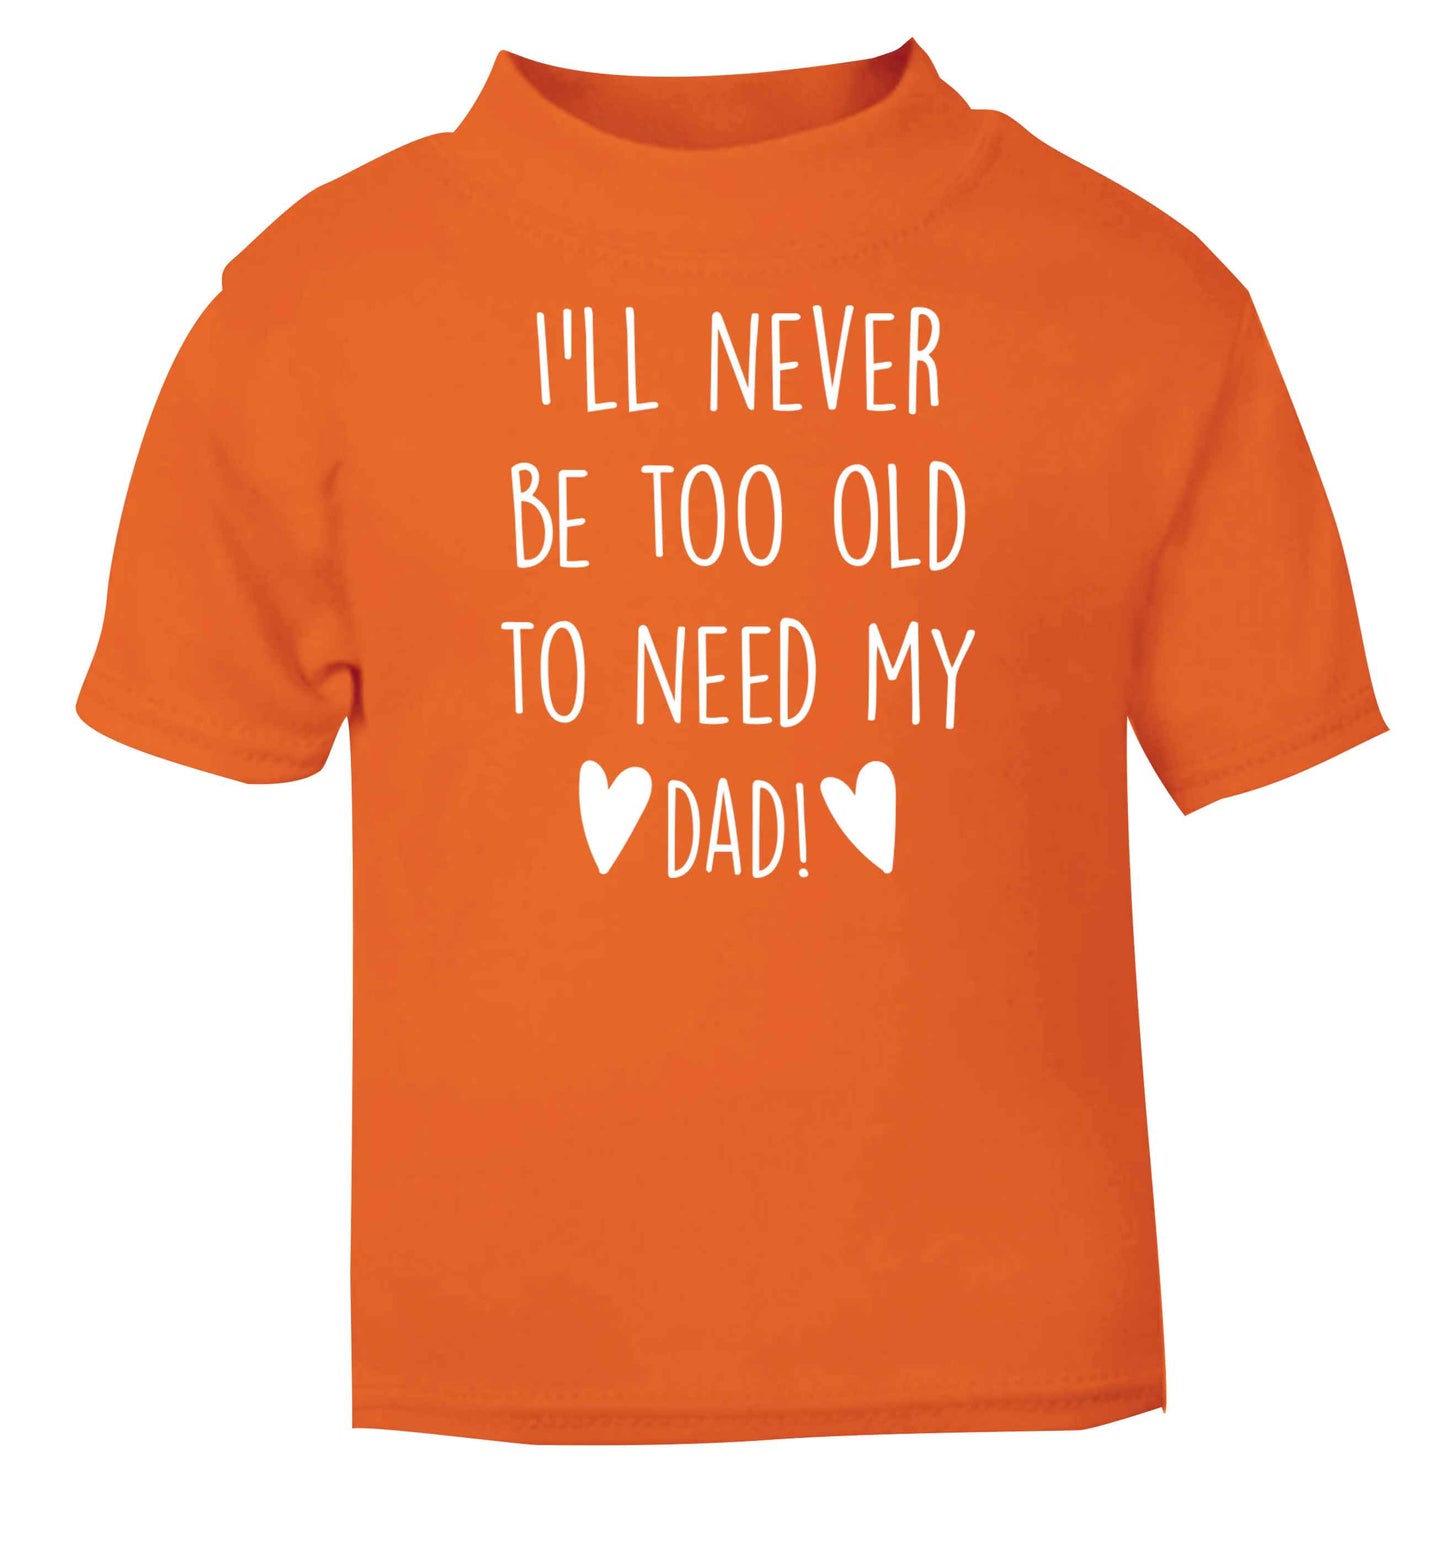 I'll never be too old to need my dad orange baby toddler Tshirt 2 Years